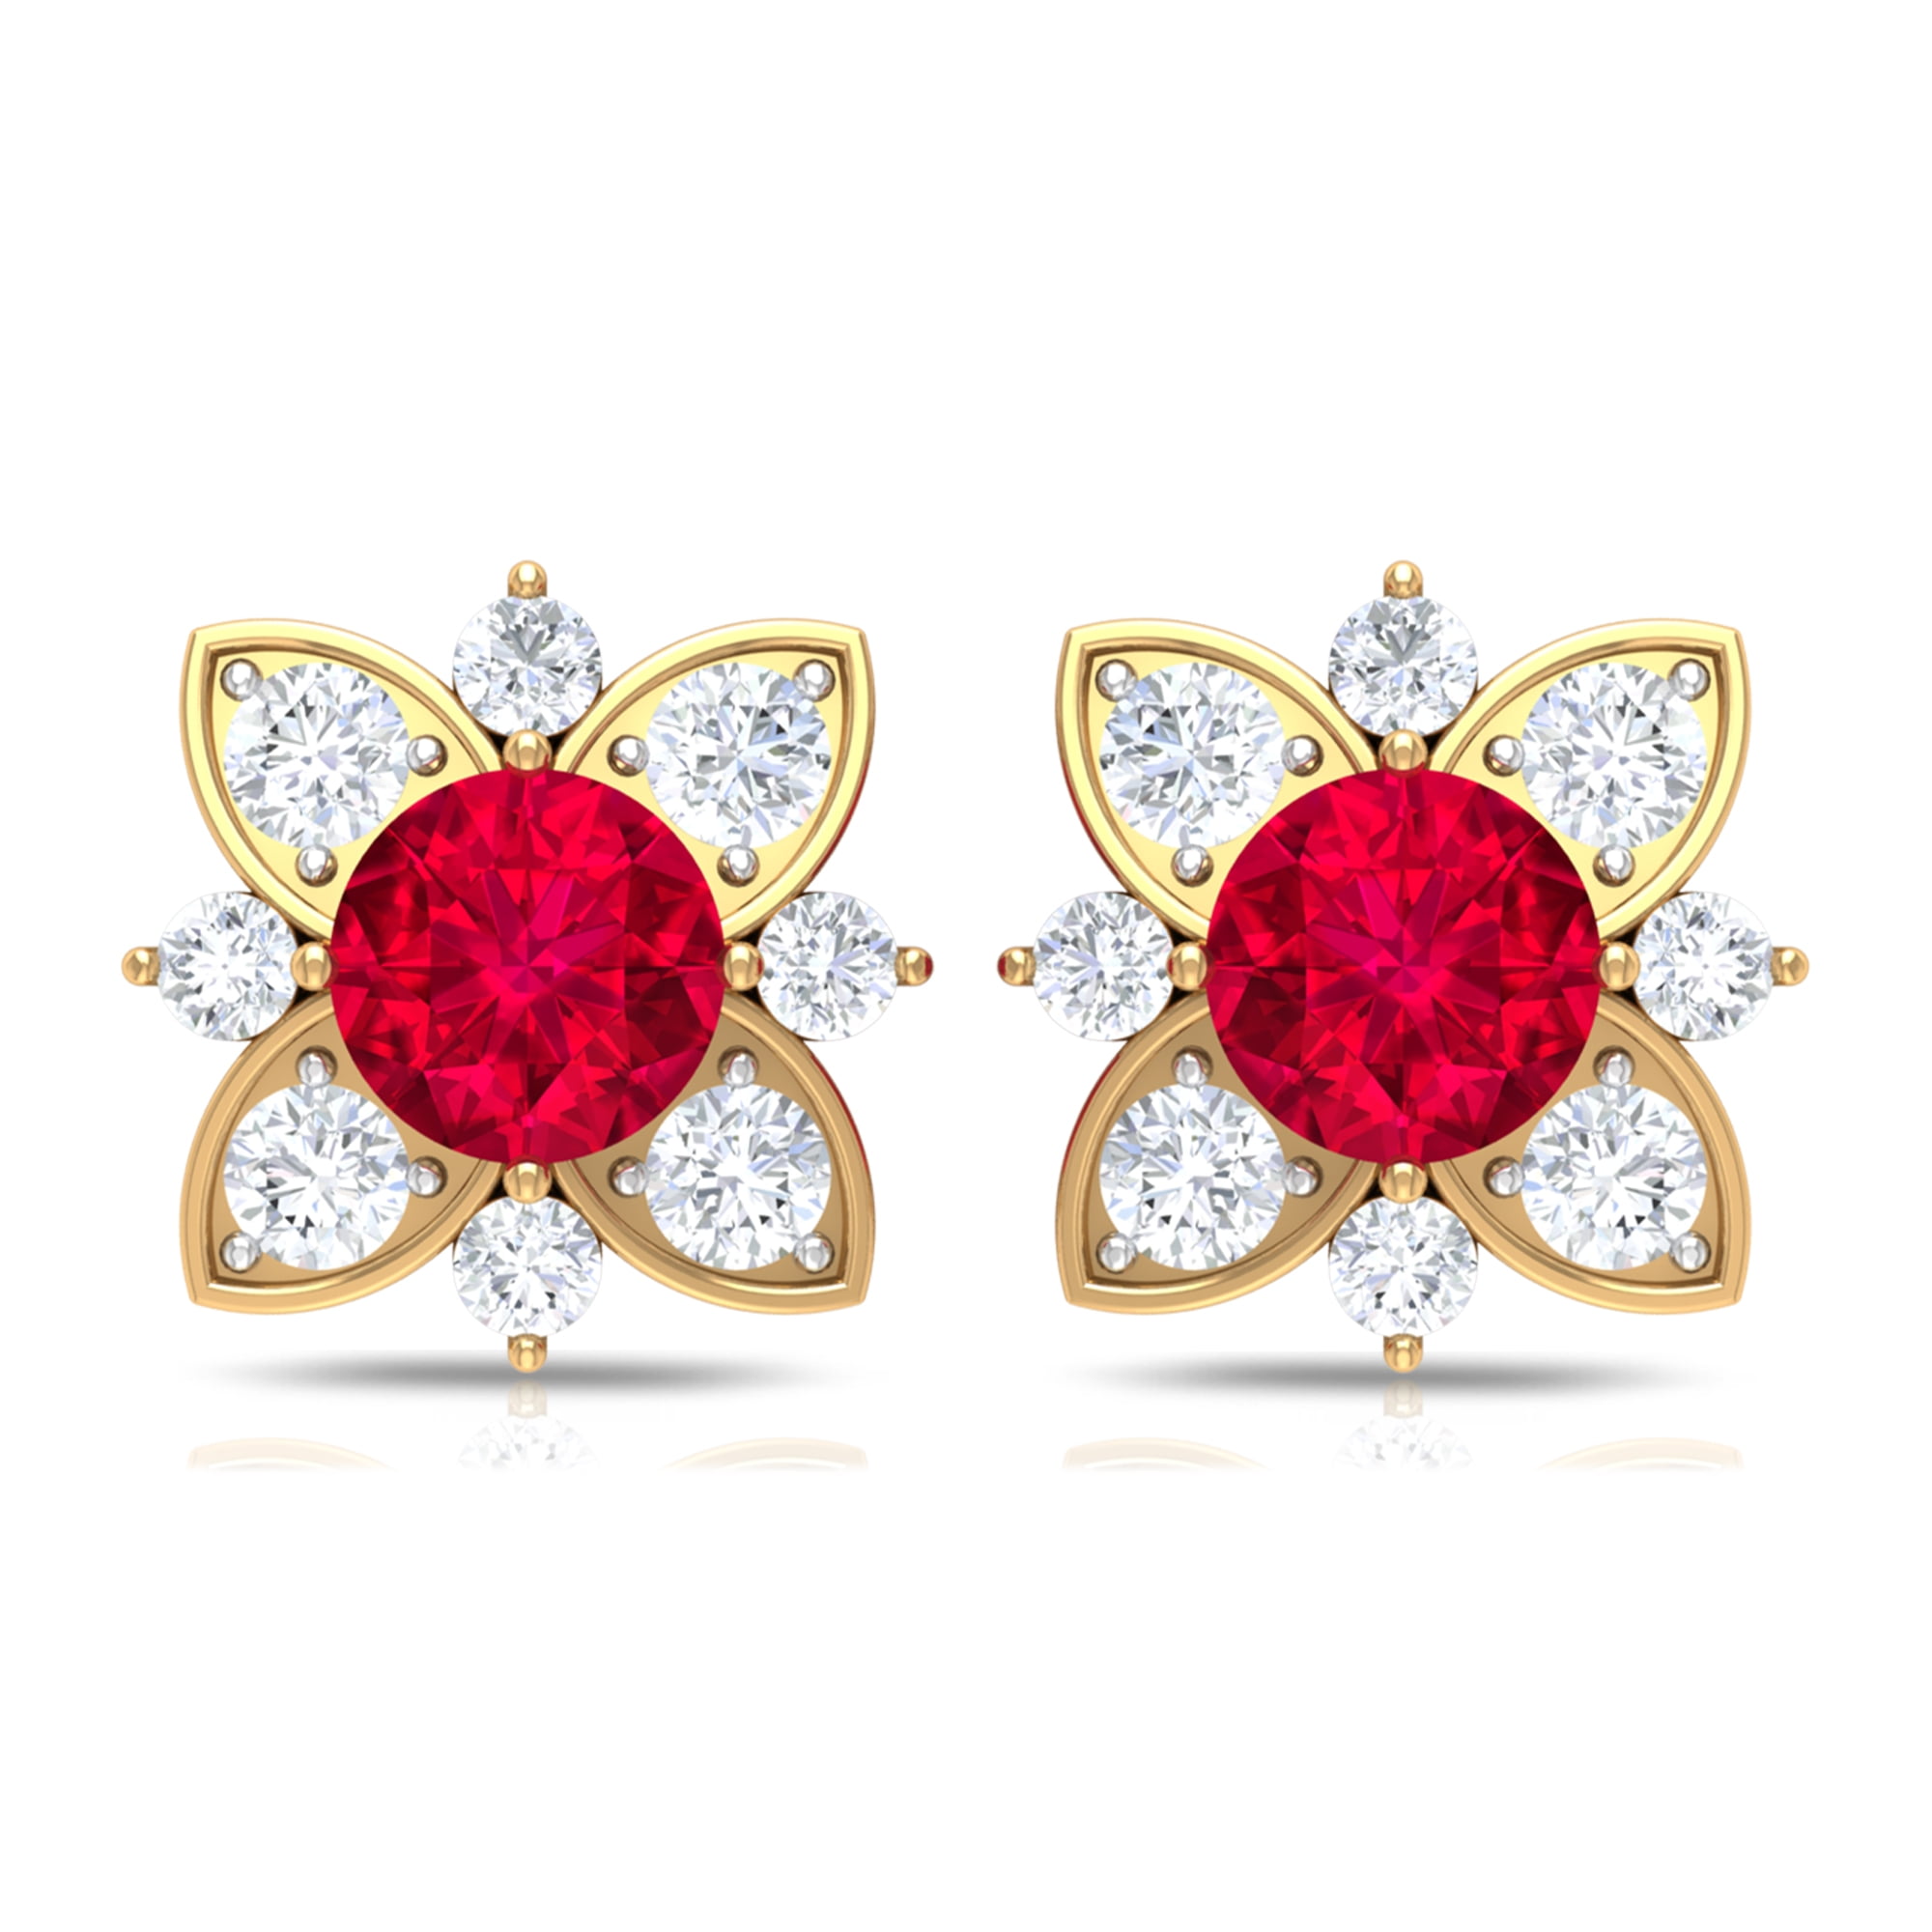 1Ct Round Cut Ruby & Diamond Cluster Flower Stud Earrings 14k Yellow Gold Finish